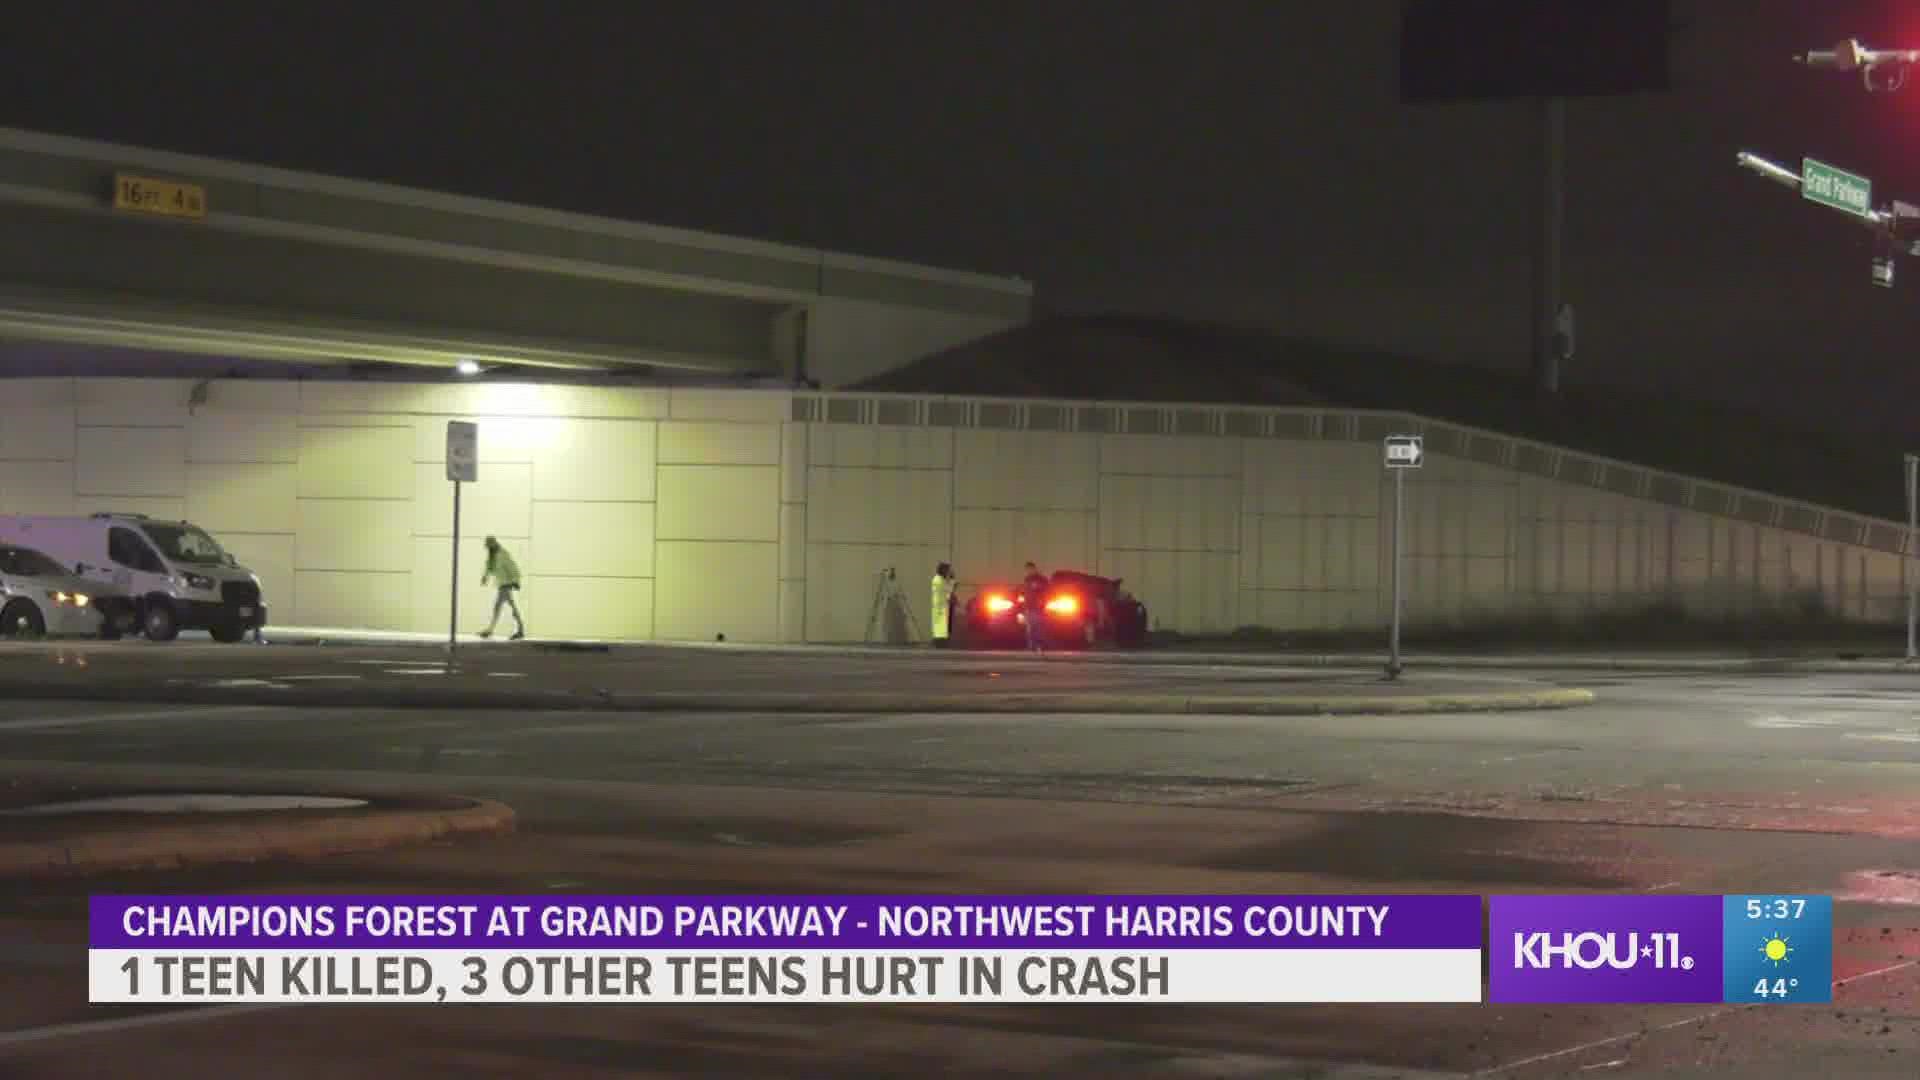 Harris County Sheriff Ed Gonzalez has identified two of the four victims as 13-year-old girls.